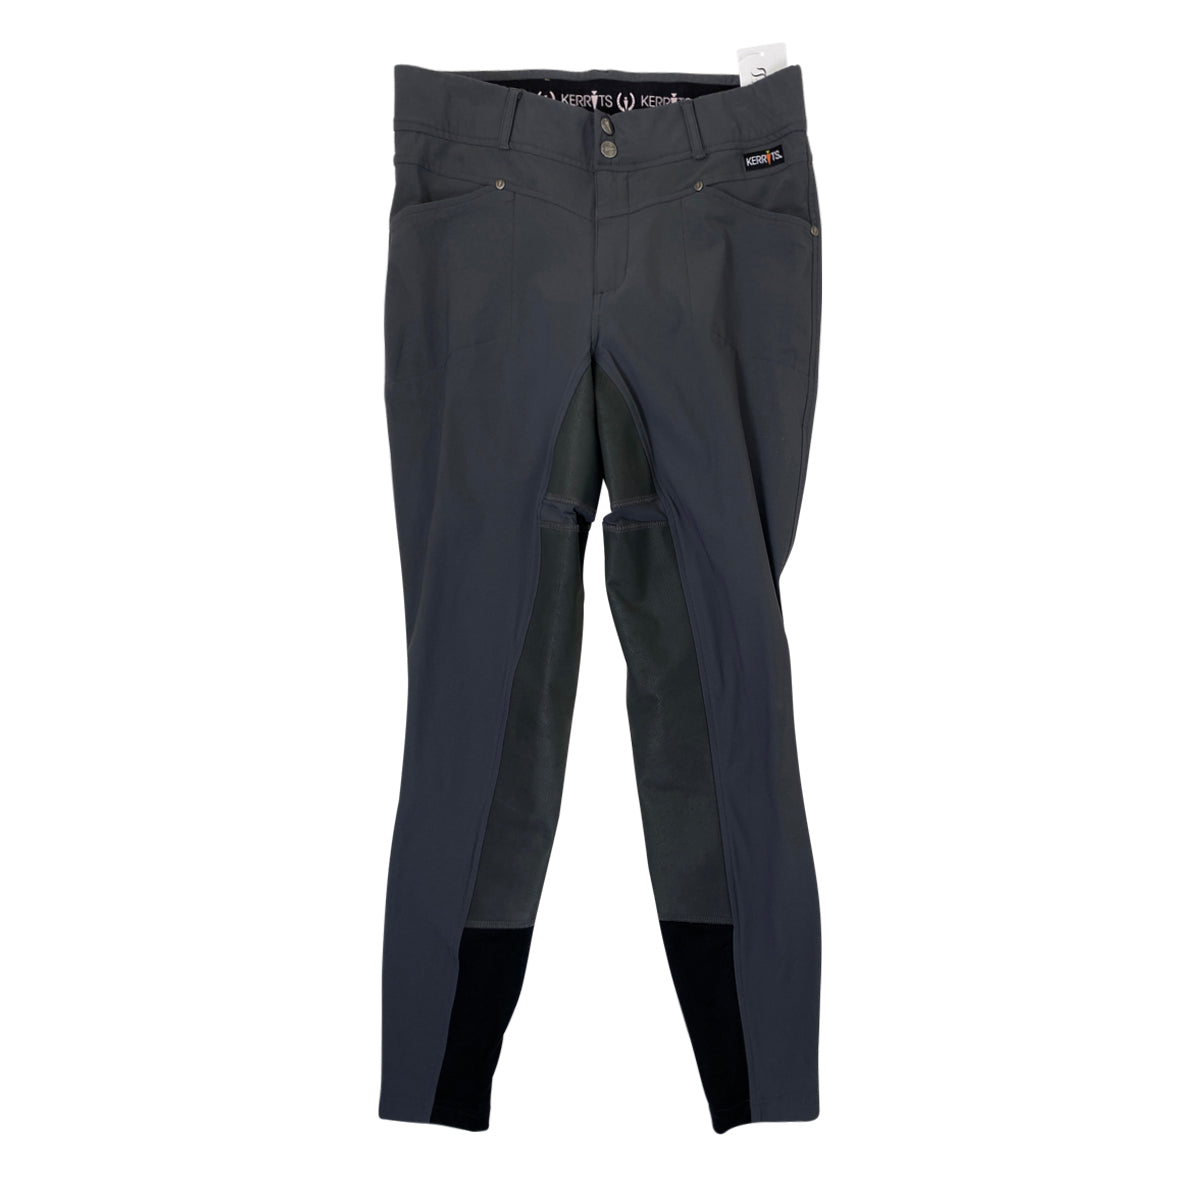 Kerrits 'Crossover' Full Seat Breeches in Grey